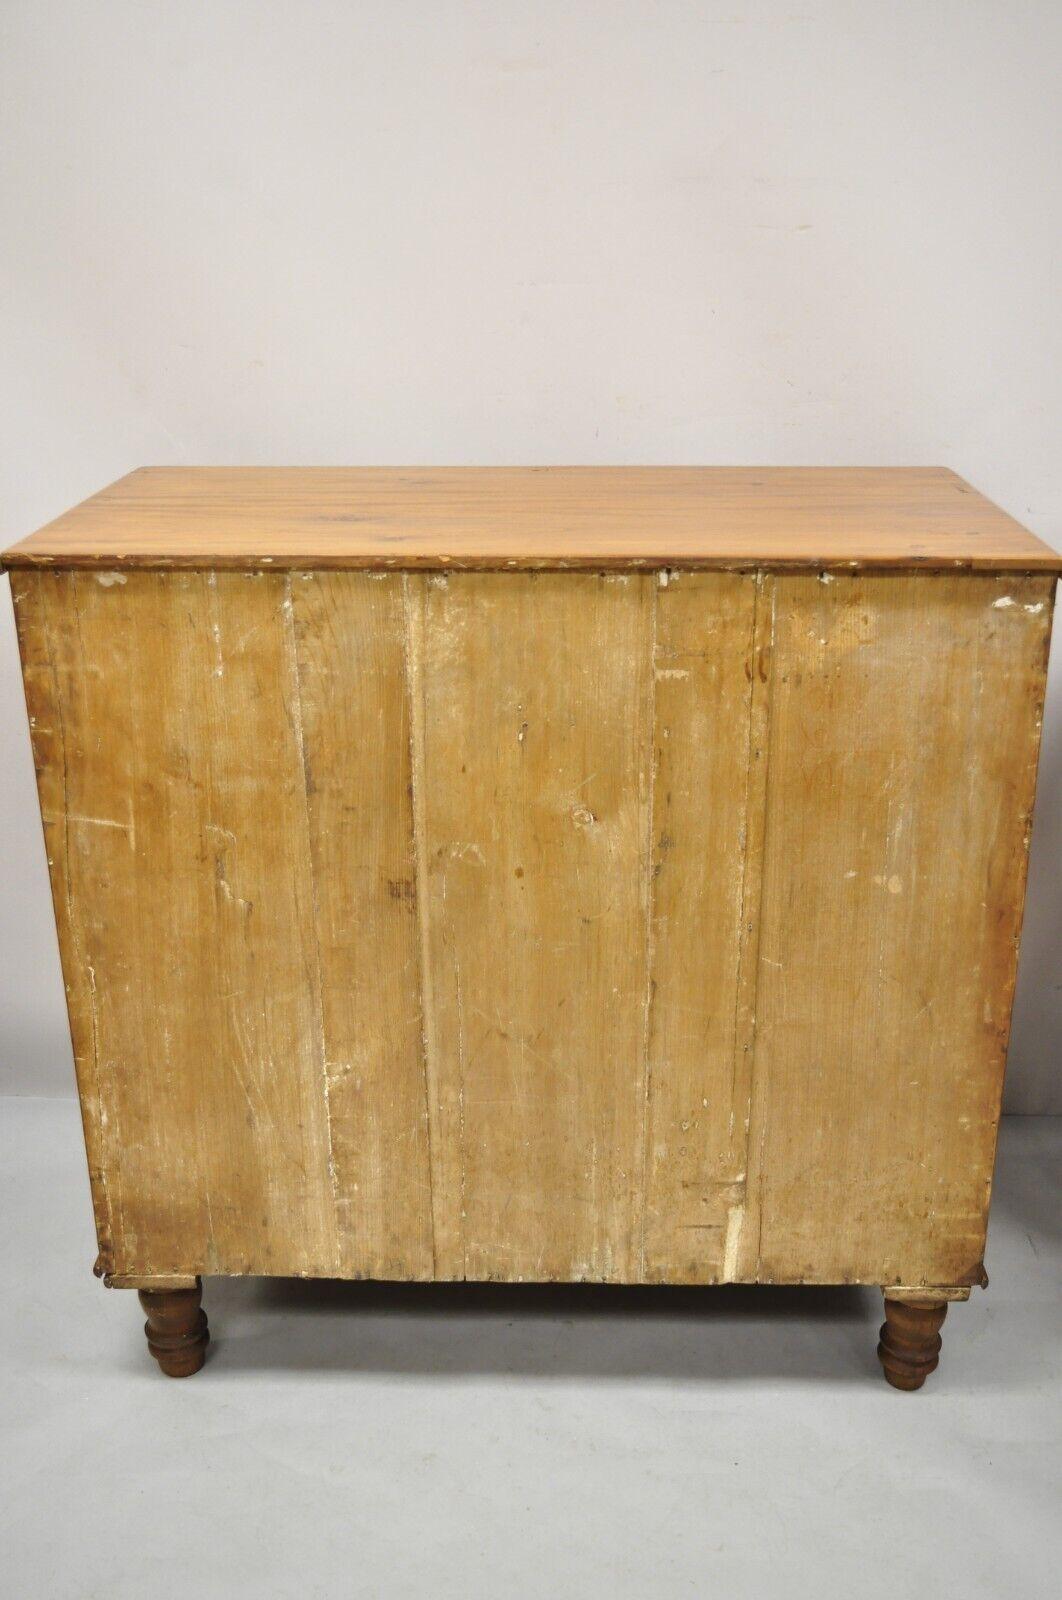 19th C. Antique Pine Wood 5 Drawer Primitive Colonial Chest Of Drawers Dresser For Sale 2